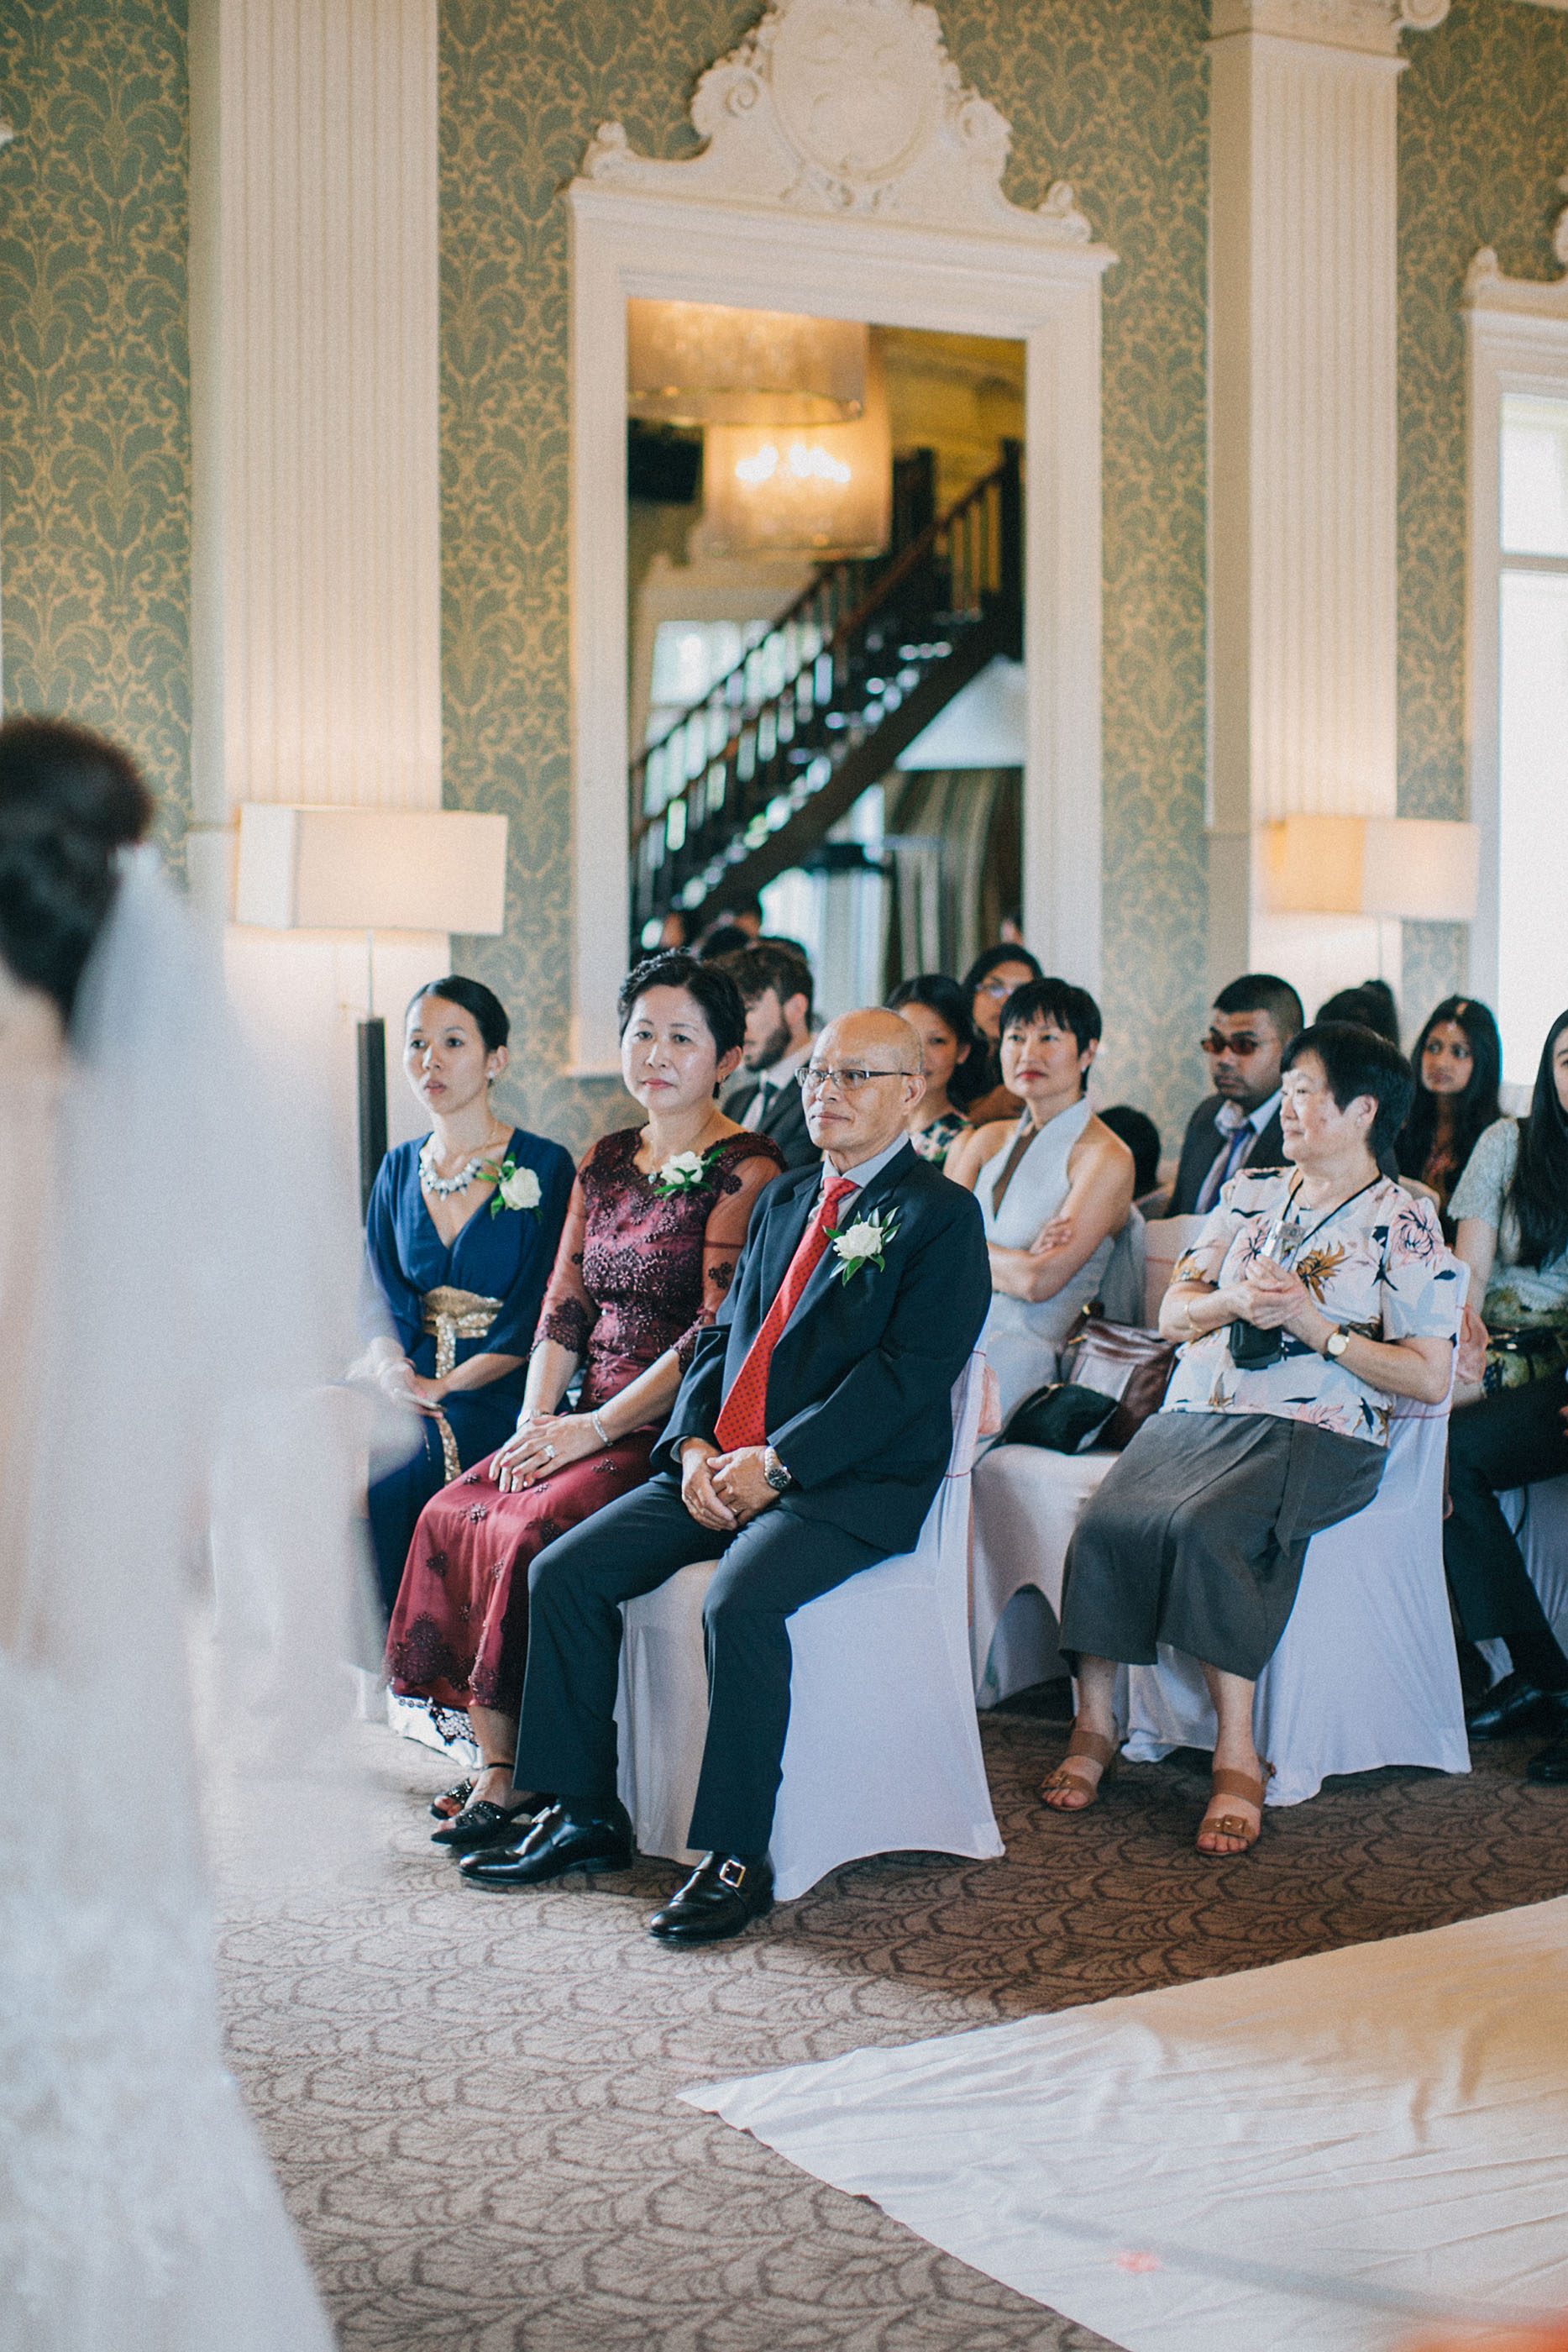 nicholas-lau-photo-photography-fine-art-film-wedding-london-asian-chinese-uk-mulitcultural-ceremony-reception-guests-seated-star-and-garter-venue